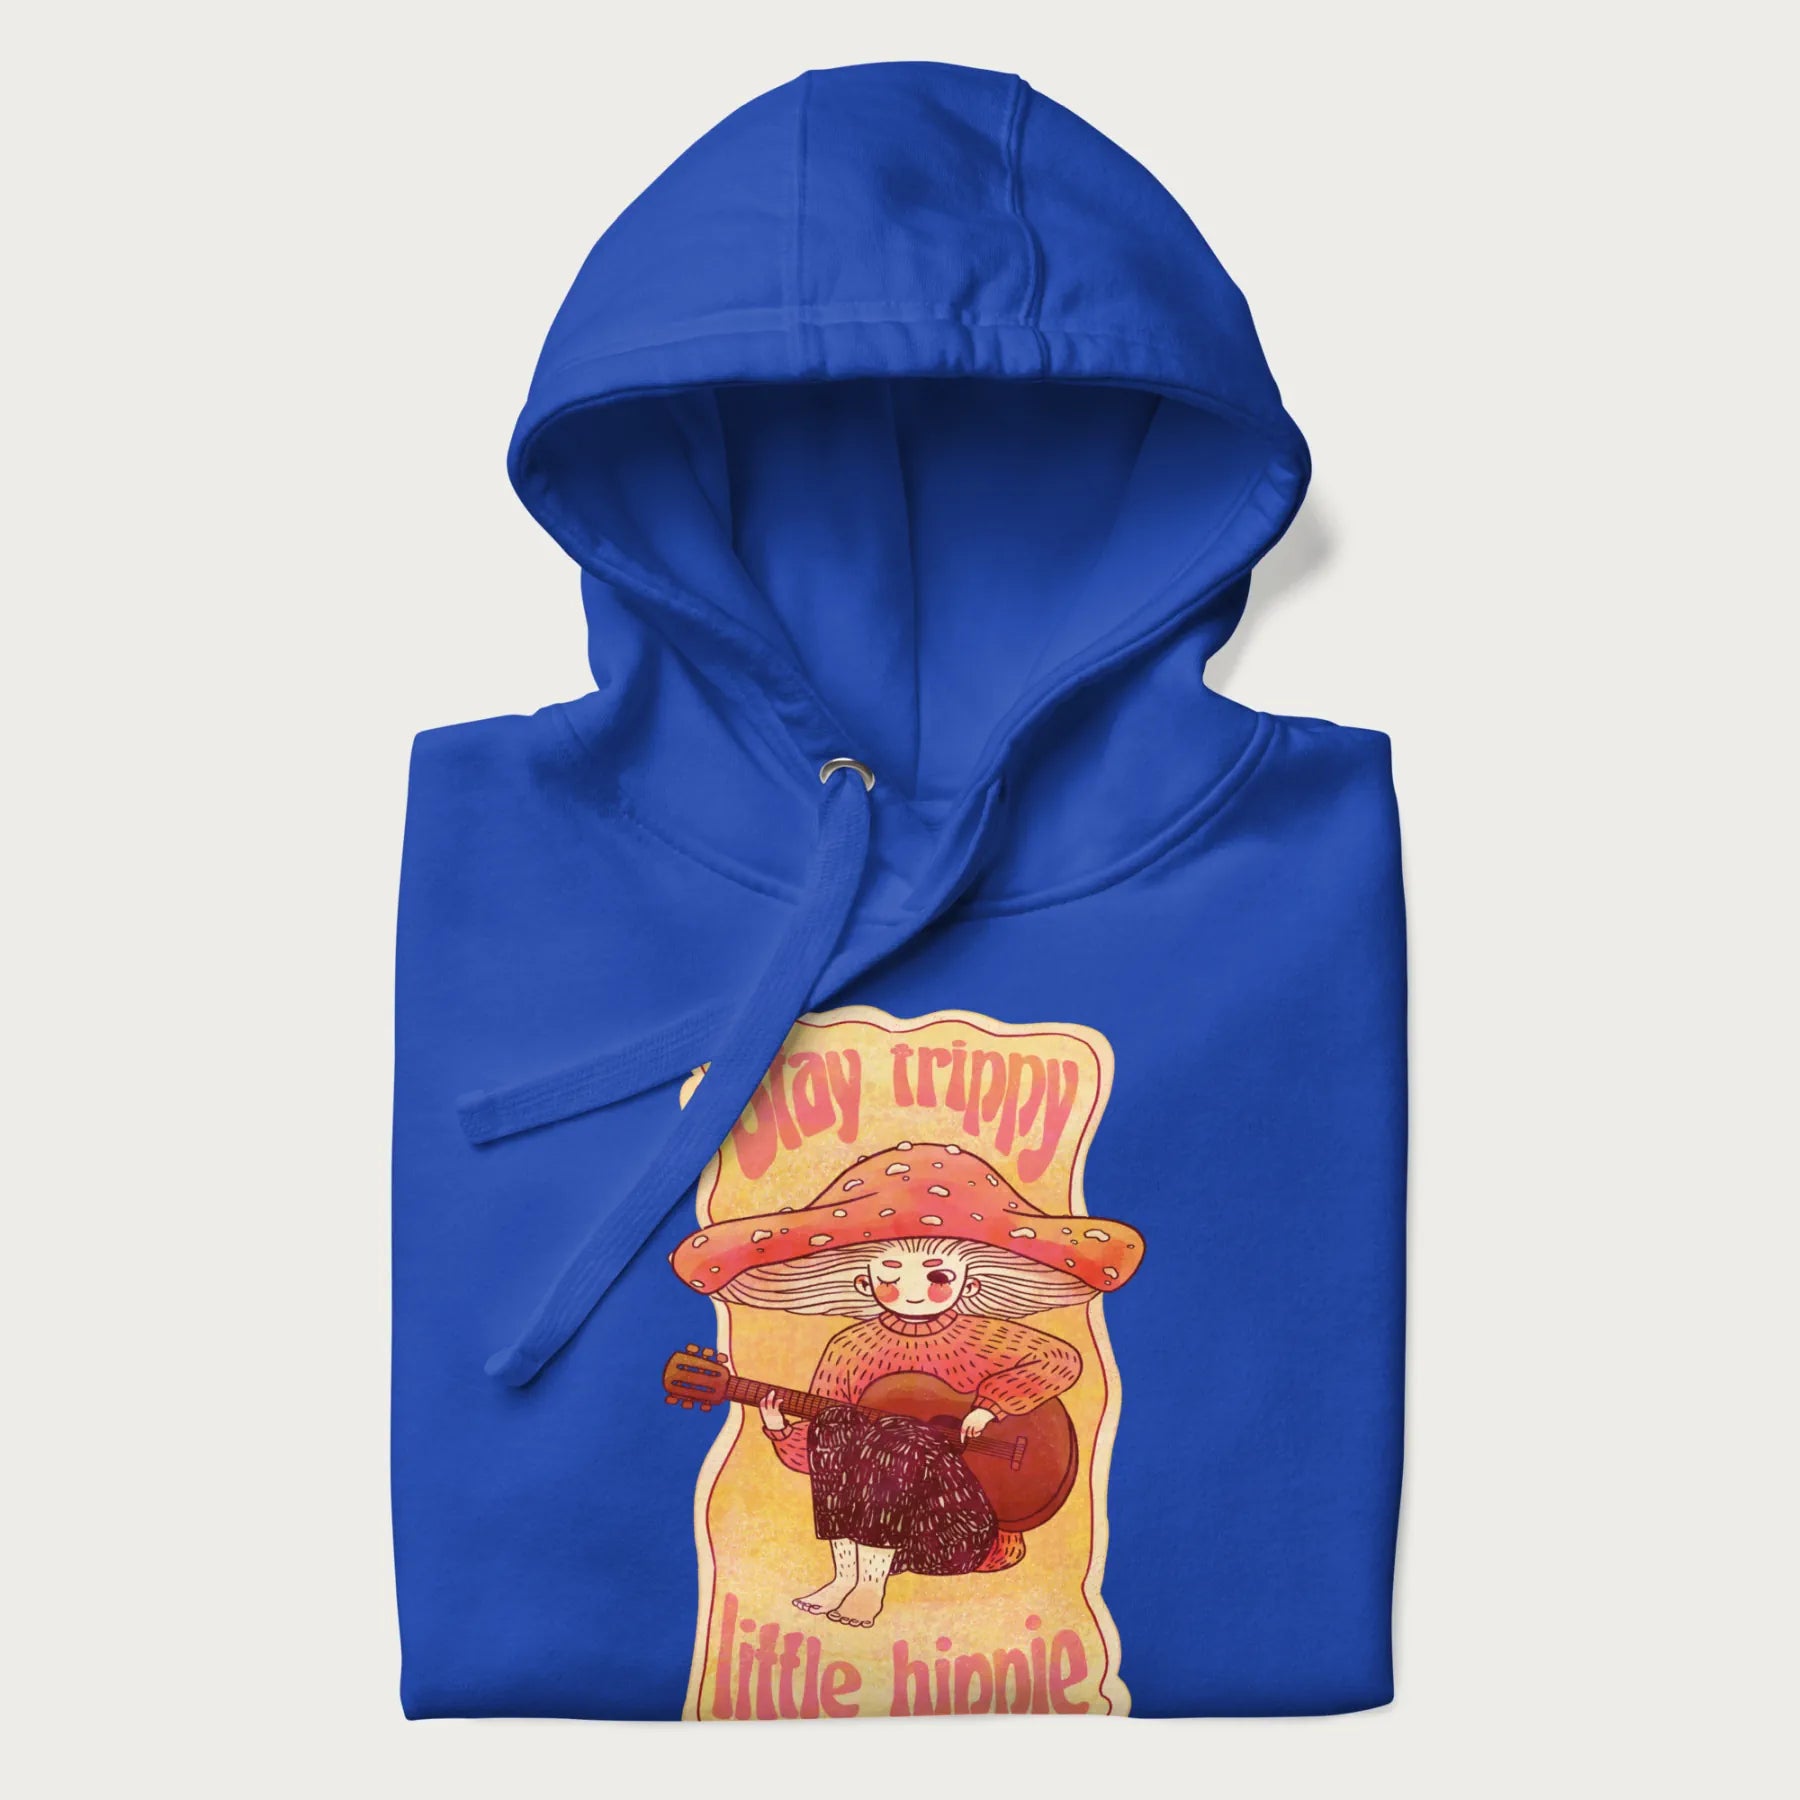 Folded royal blue hoodie with a graphic of a character with a mushroom cap playing a guitar and the text 'Stay Trippy Little Hippie.'